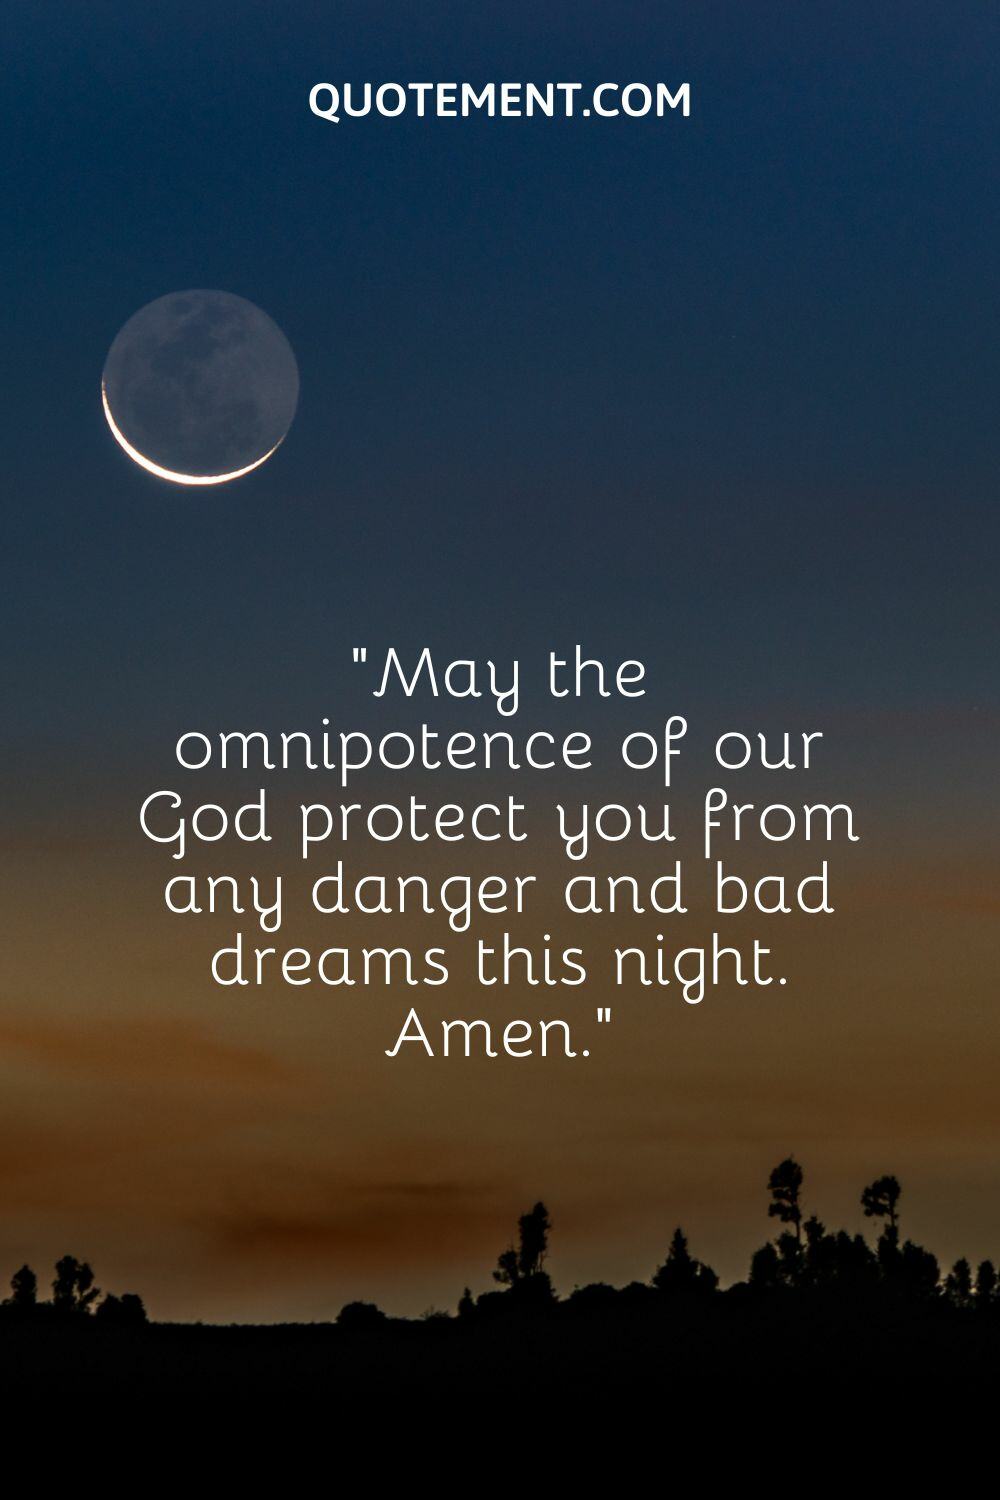 May the omnipotence of our God protect you from any danger and bad dreams this night